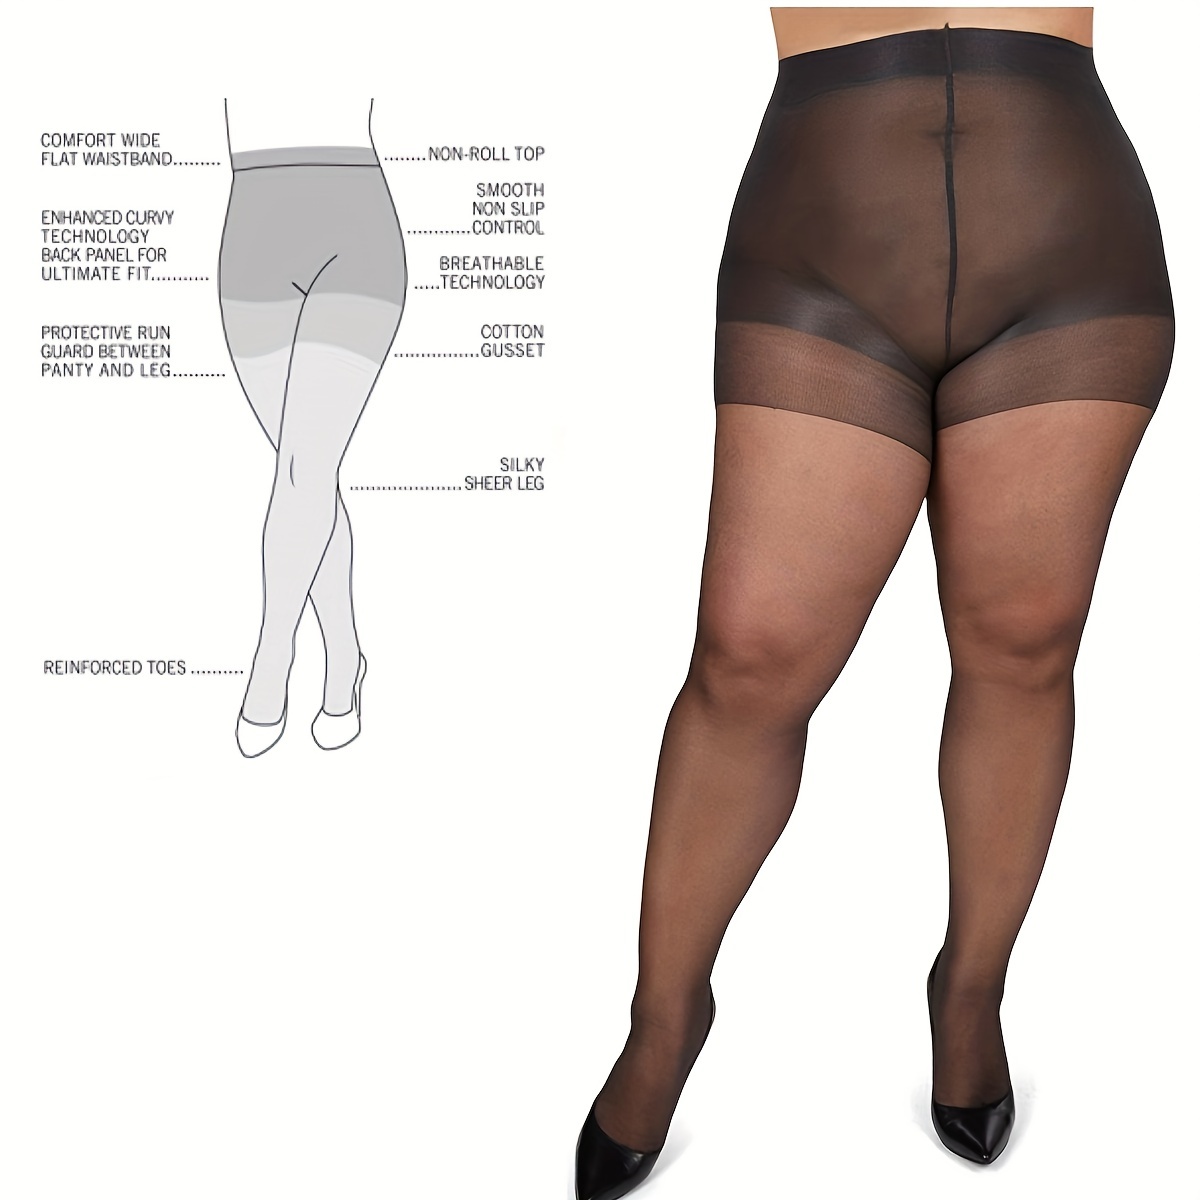 Women's 4 Packs of Ultra Stretchable Plus Size Sheer Stockings for 220lbs  Footed Pantyhose High Waist Tights